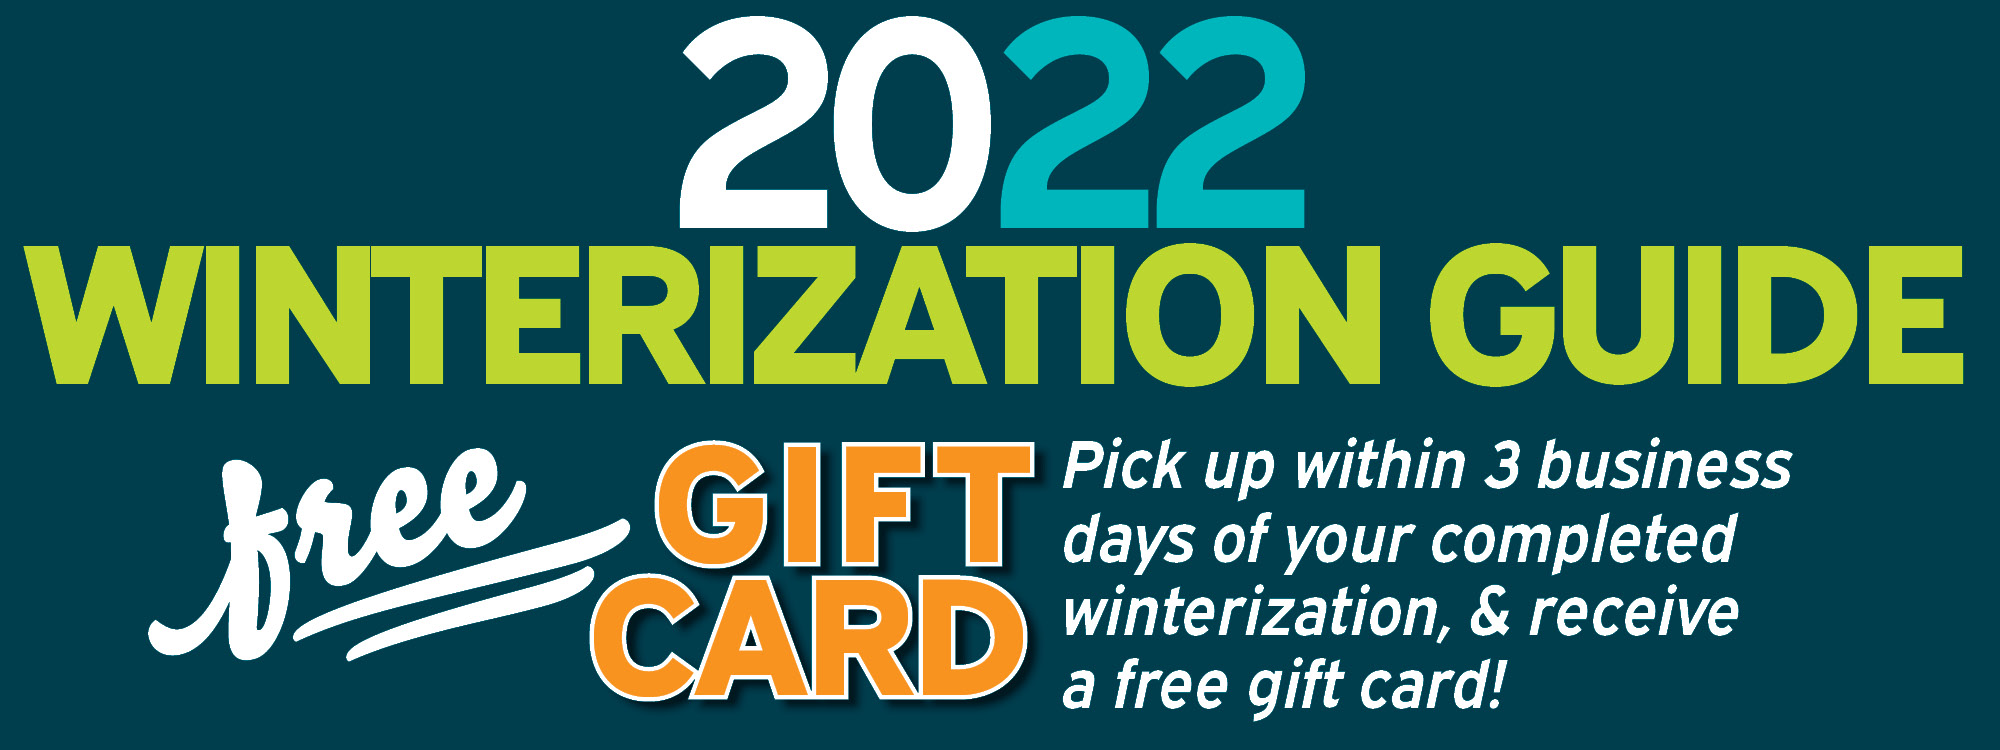 Free Gift Card if pickup within three business days of your completed winterization